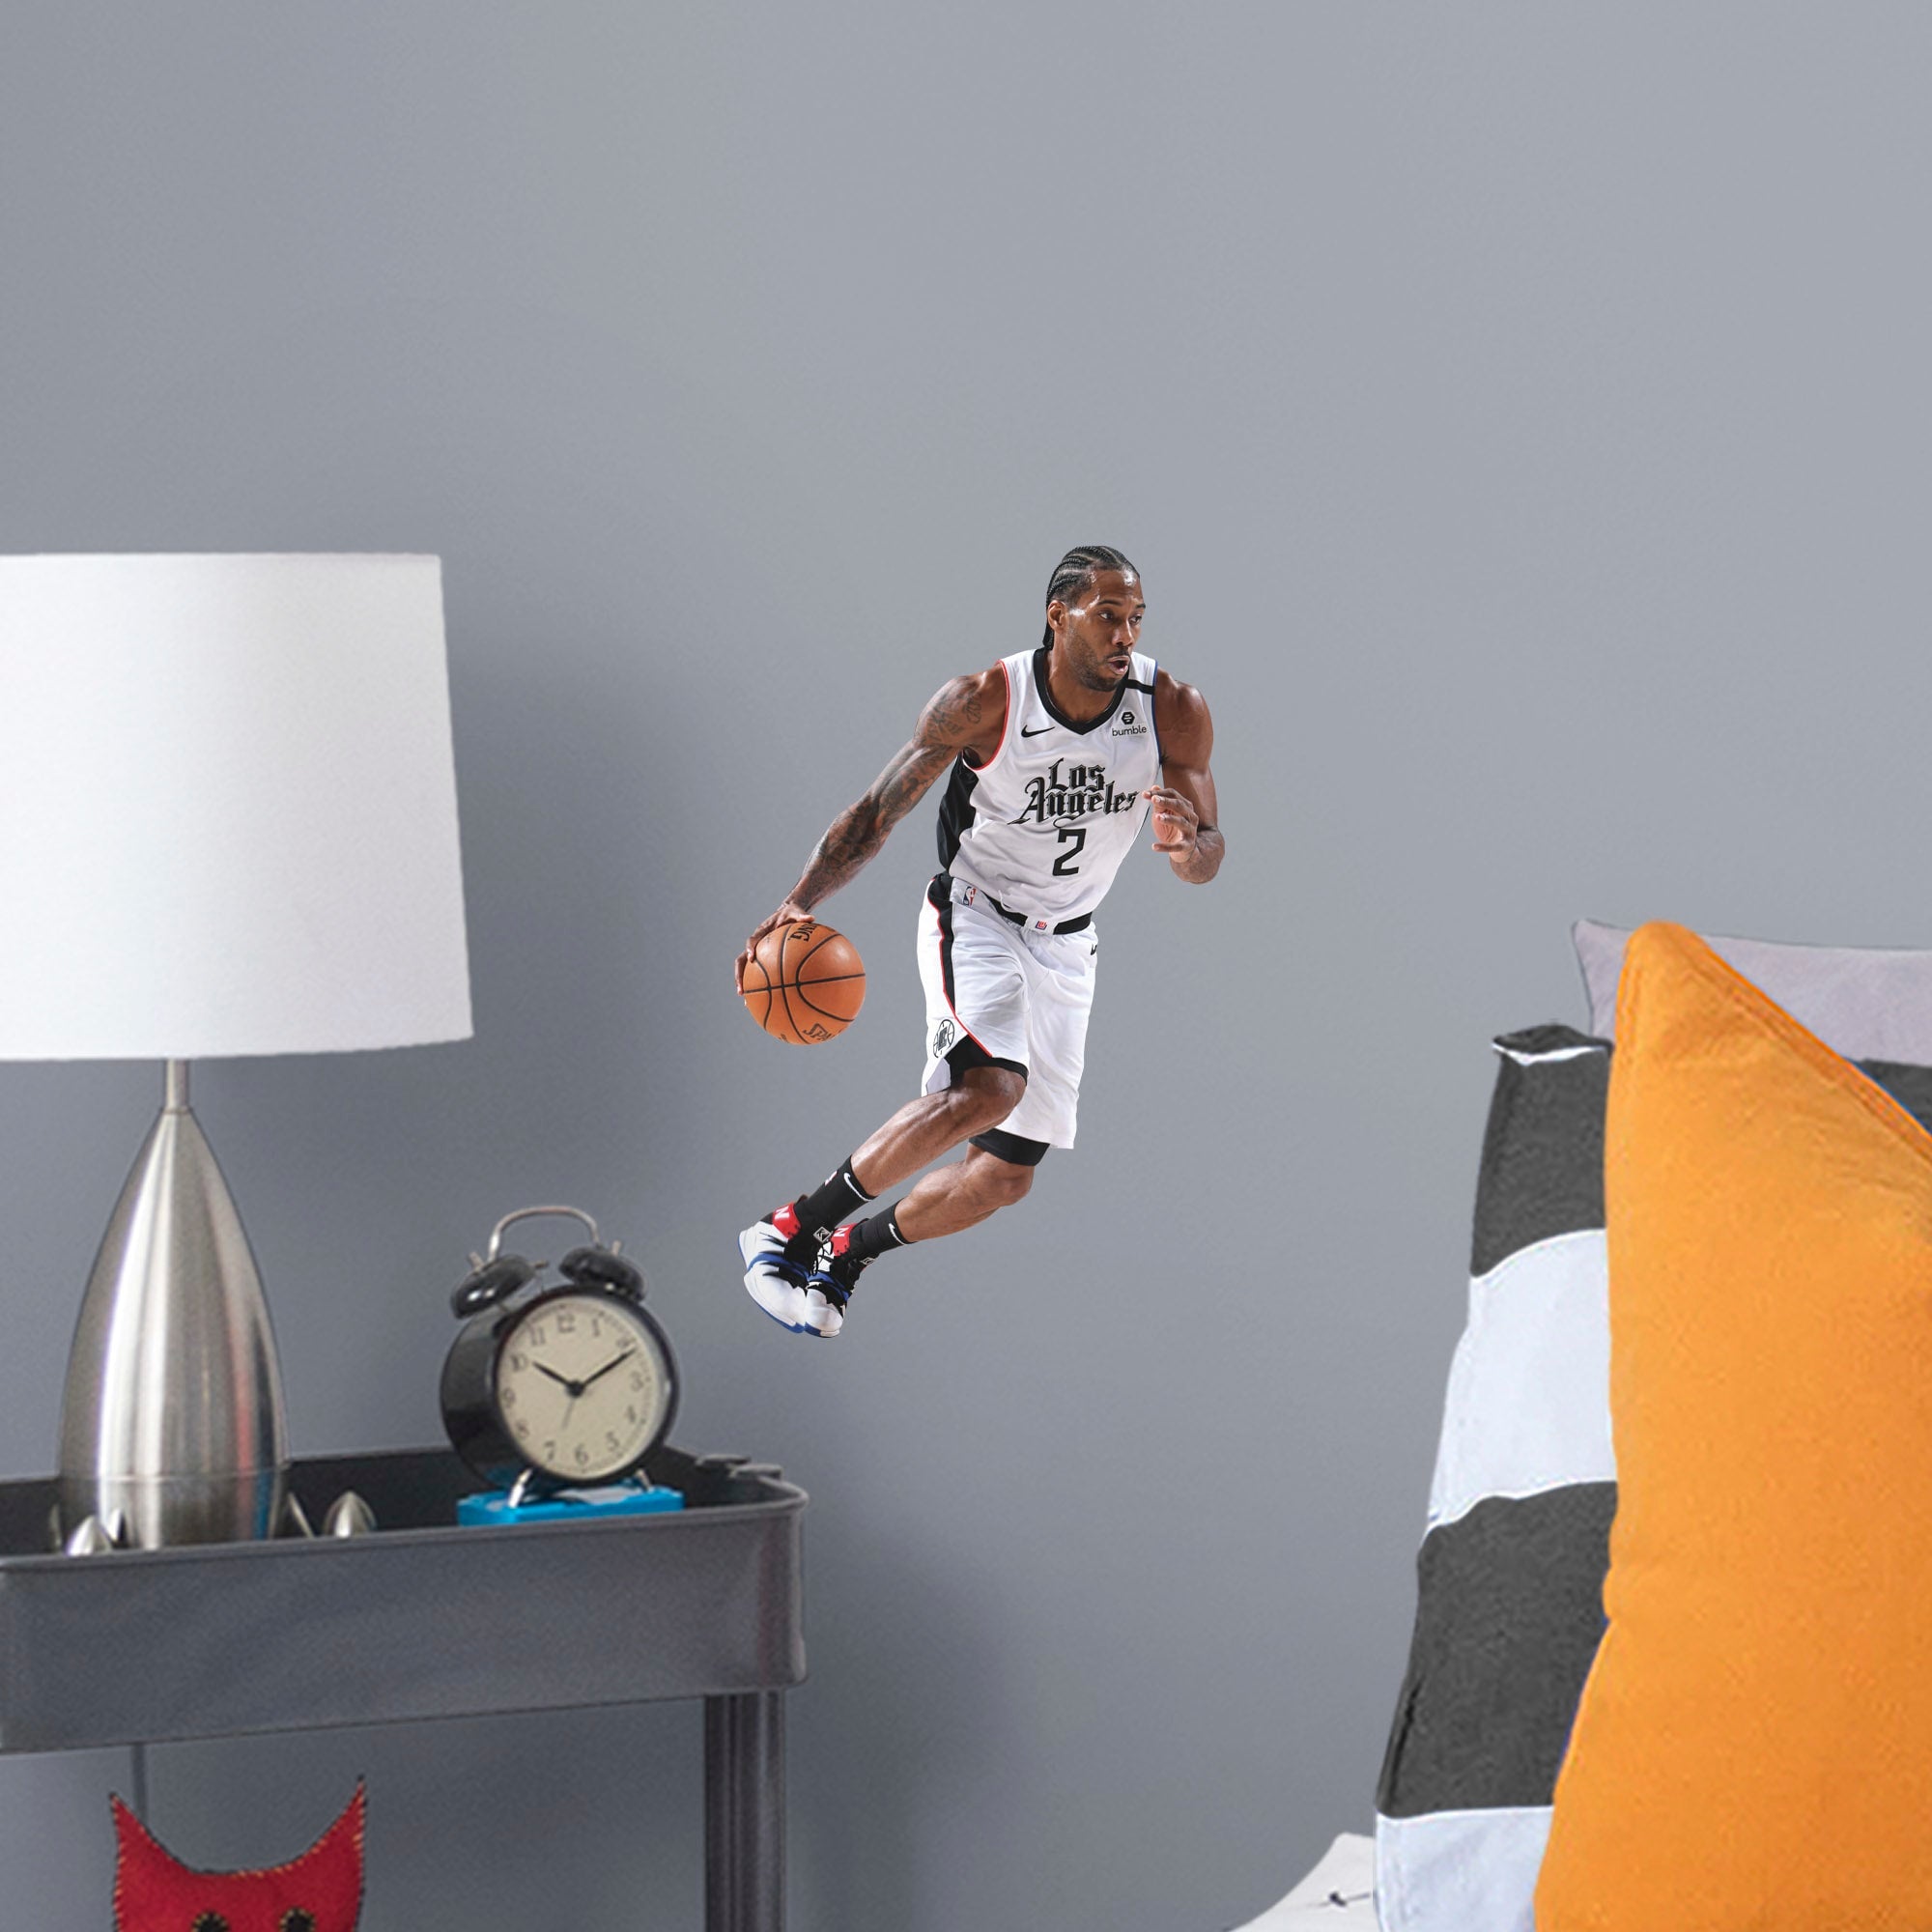 Kawhi Leonard for Los Angeles Clippers: City Jersey - Officially Licensed NBA Removable Wall Decal Large by Fathead | Vinyl